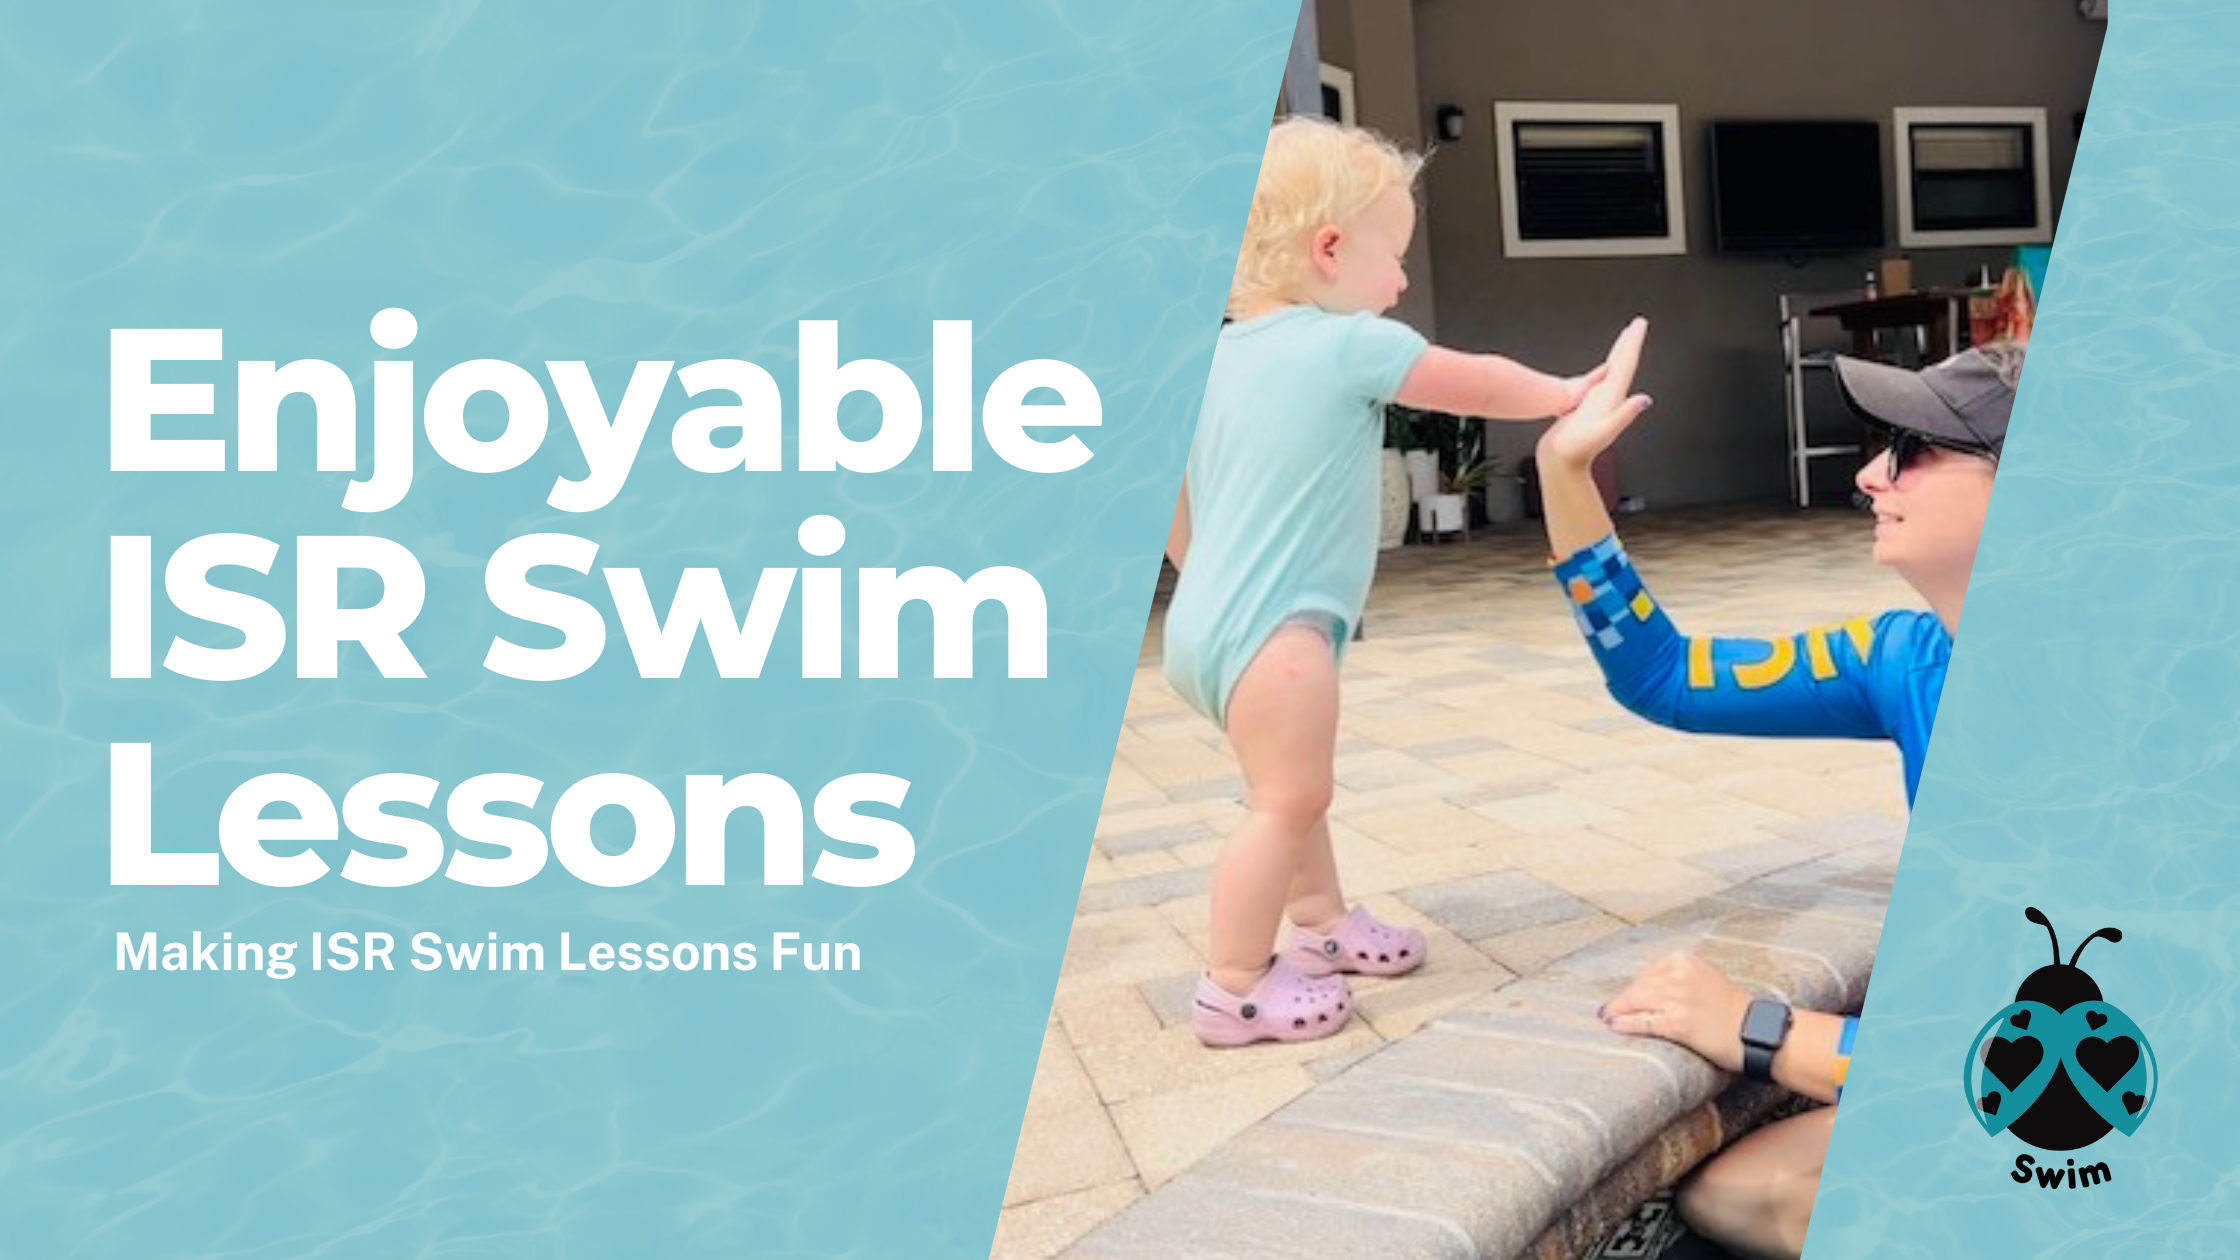 Certified ISR instructor high-fiving a young child at the poolside during swim lessons.